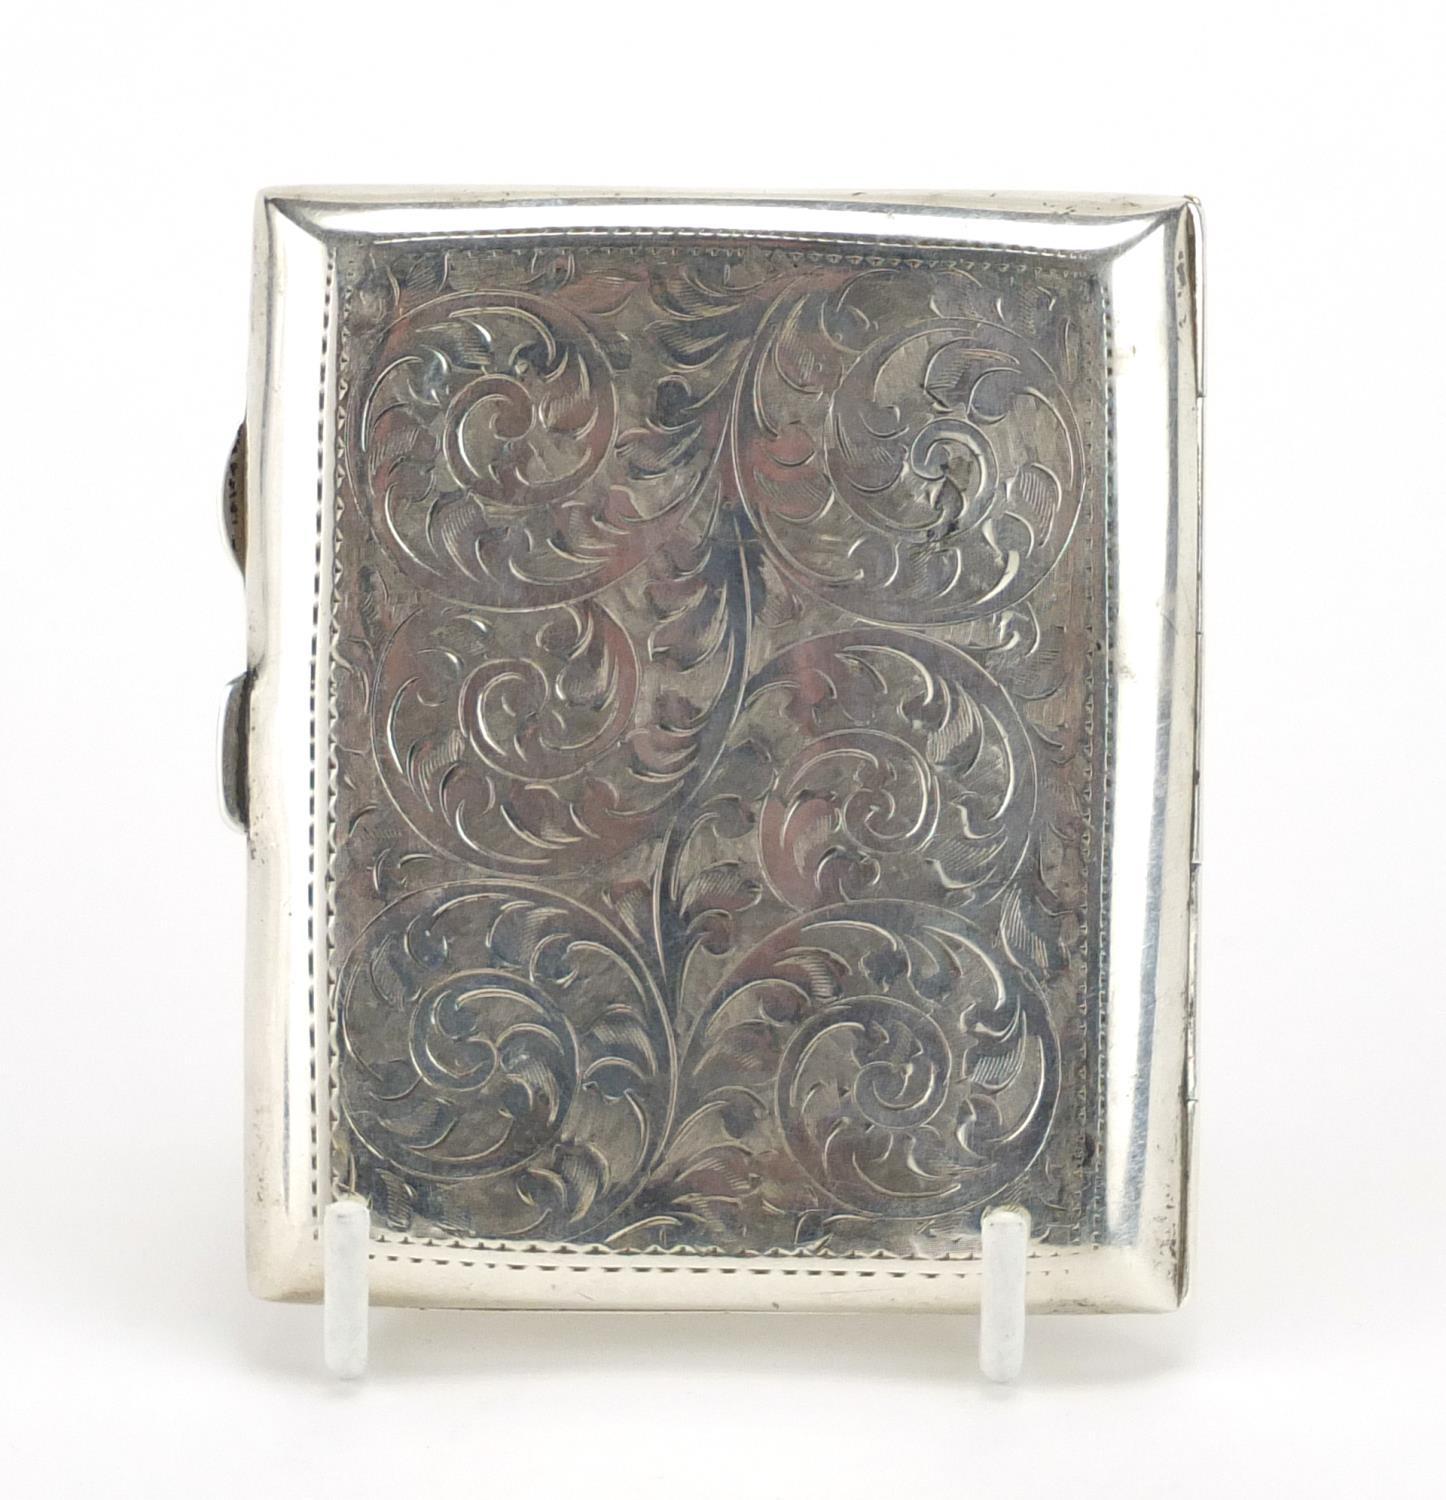 Rectangular silver cigarette case with enamelled semi nude female panel, by W J Myatt & Co - Image 6 of 6